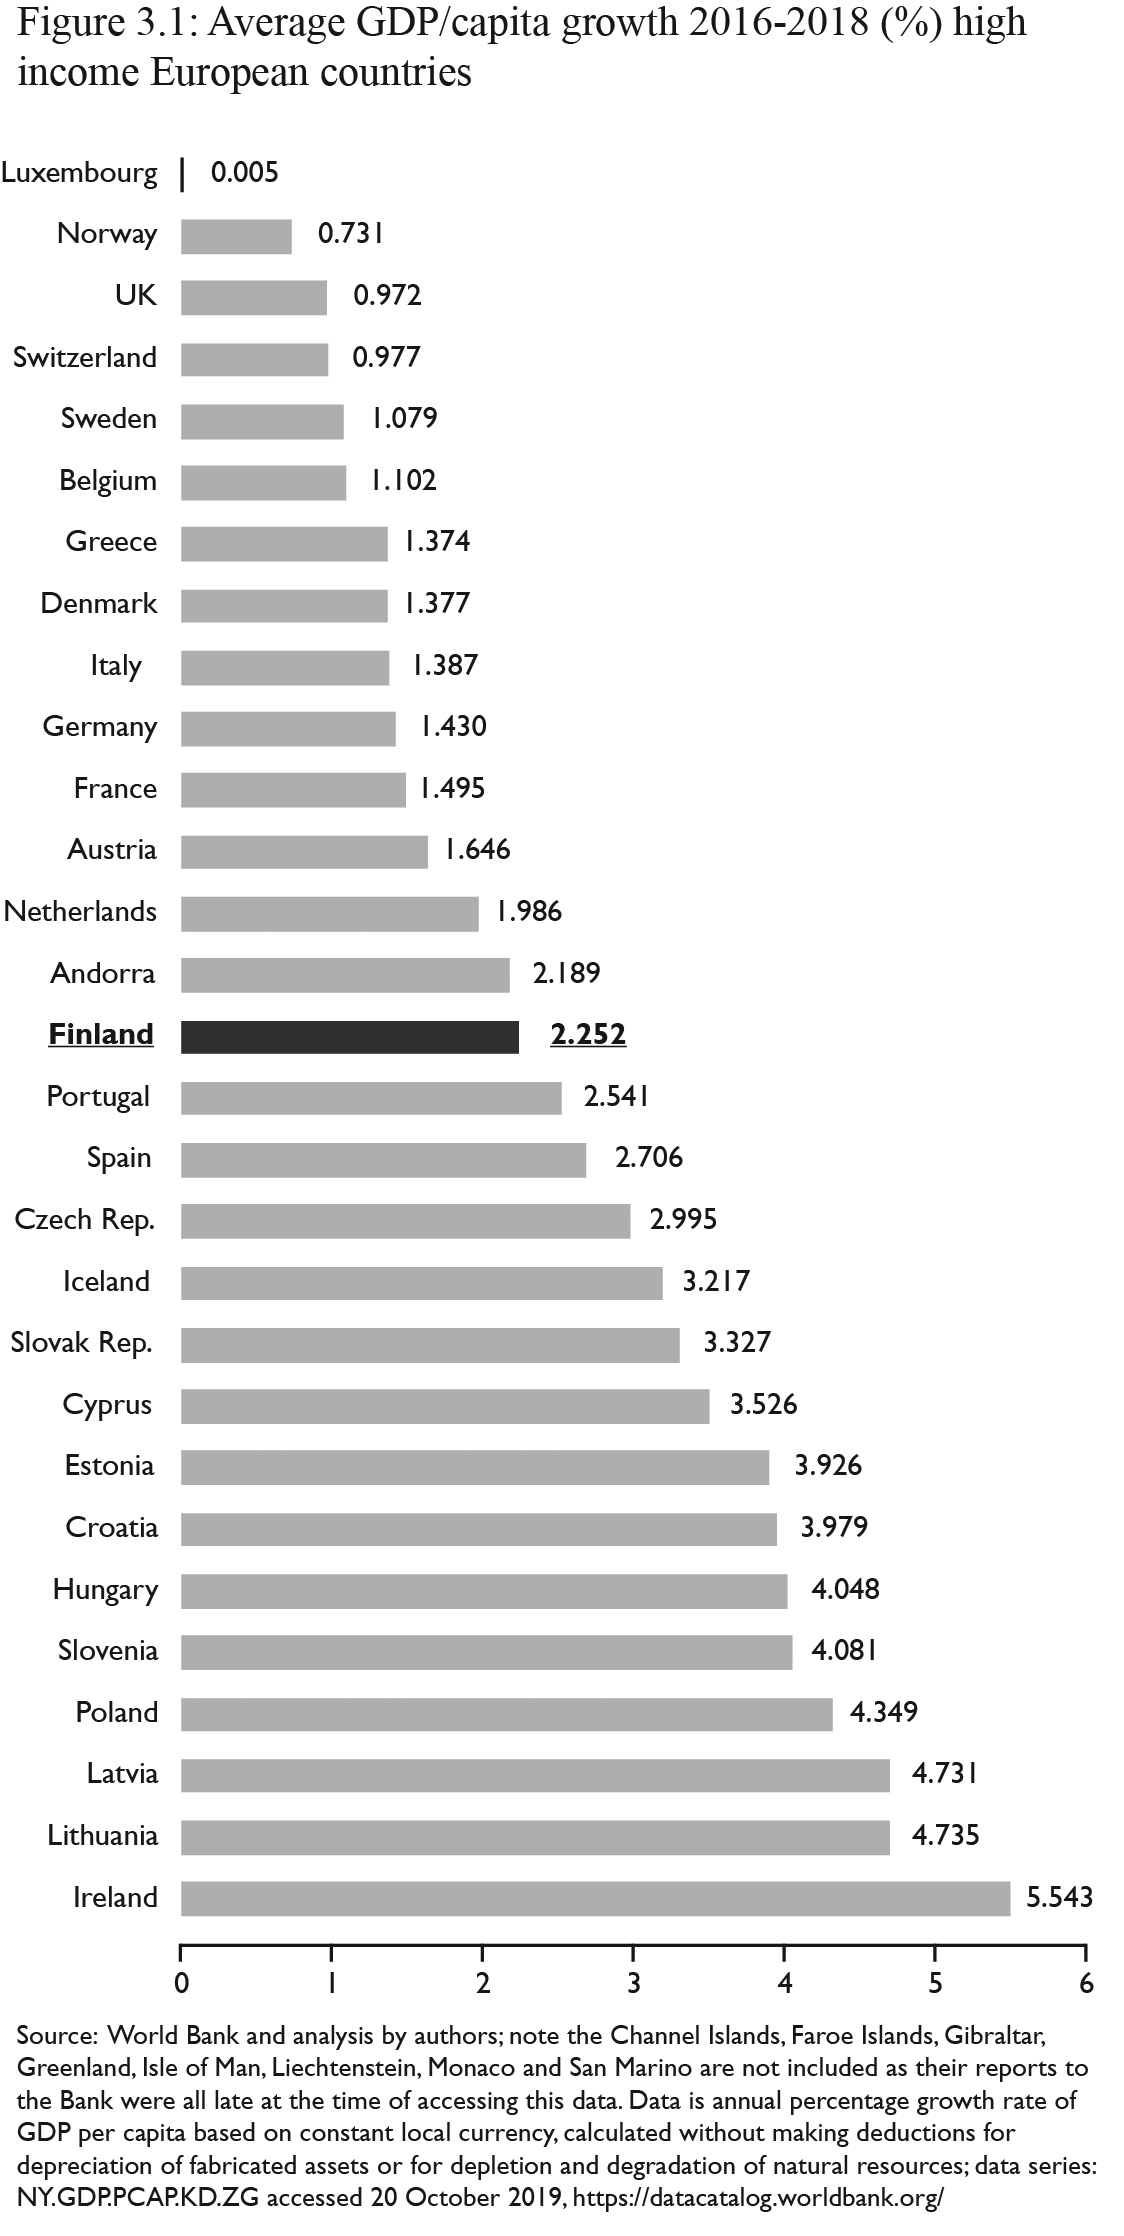 Figure 3.1: Source: World Bank and analysis by authors; note the Channel Islands, the Faroe Islands, Gibraltar, Greenland, the Isle of Man, Liechtenstein, Monaco and San Marino are not included as their reports to the World Bank were all late at the time of accessing this data. Data is annual percentage growth rate of GDP per capita based on constant local currency for high income countries (‘high’ as defined by the World Bank): calculated without making deductions for depreciation of fabricated assets or for depletion and degradation of natural resources, data series: NY.GDP.PCAP.KD.ZG accessed 20 October, https://datacatalog.worldbank.org/